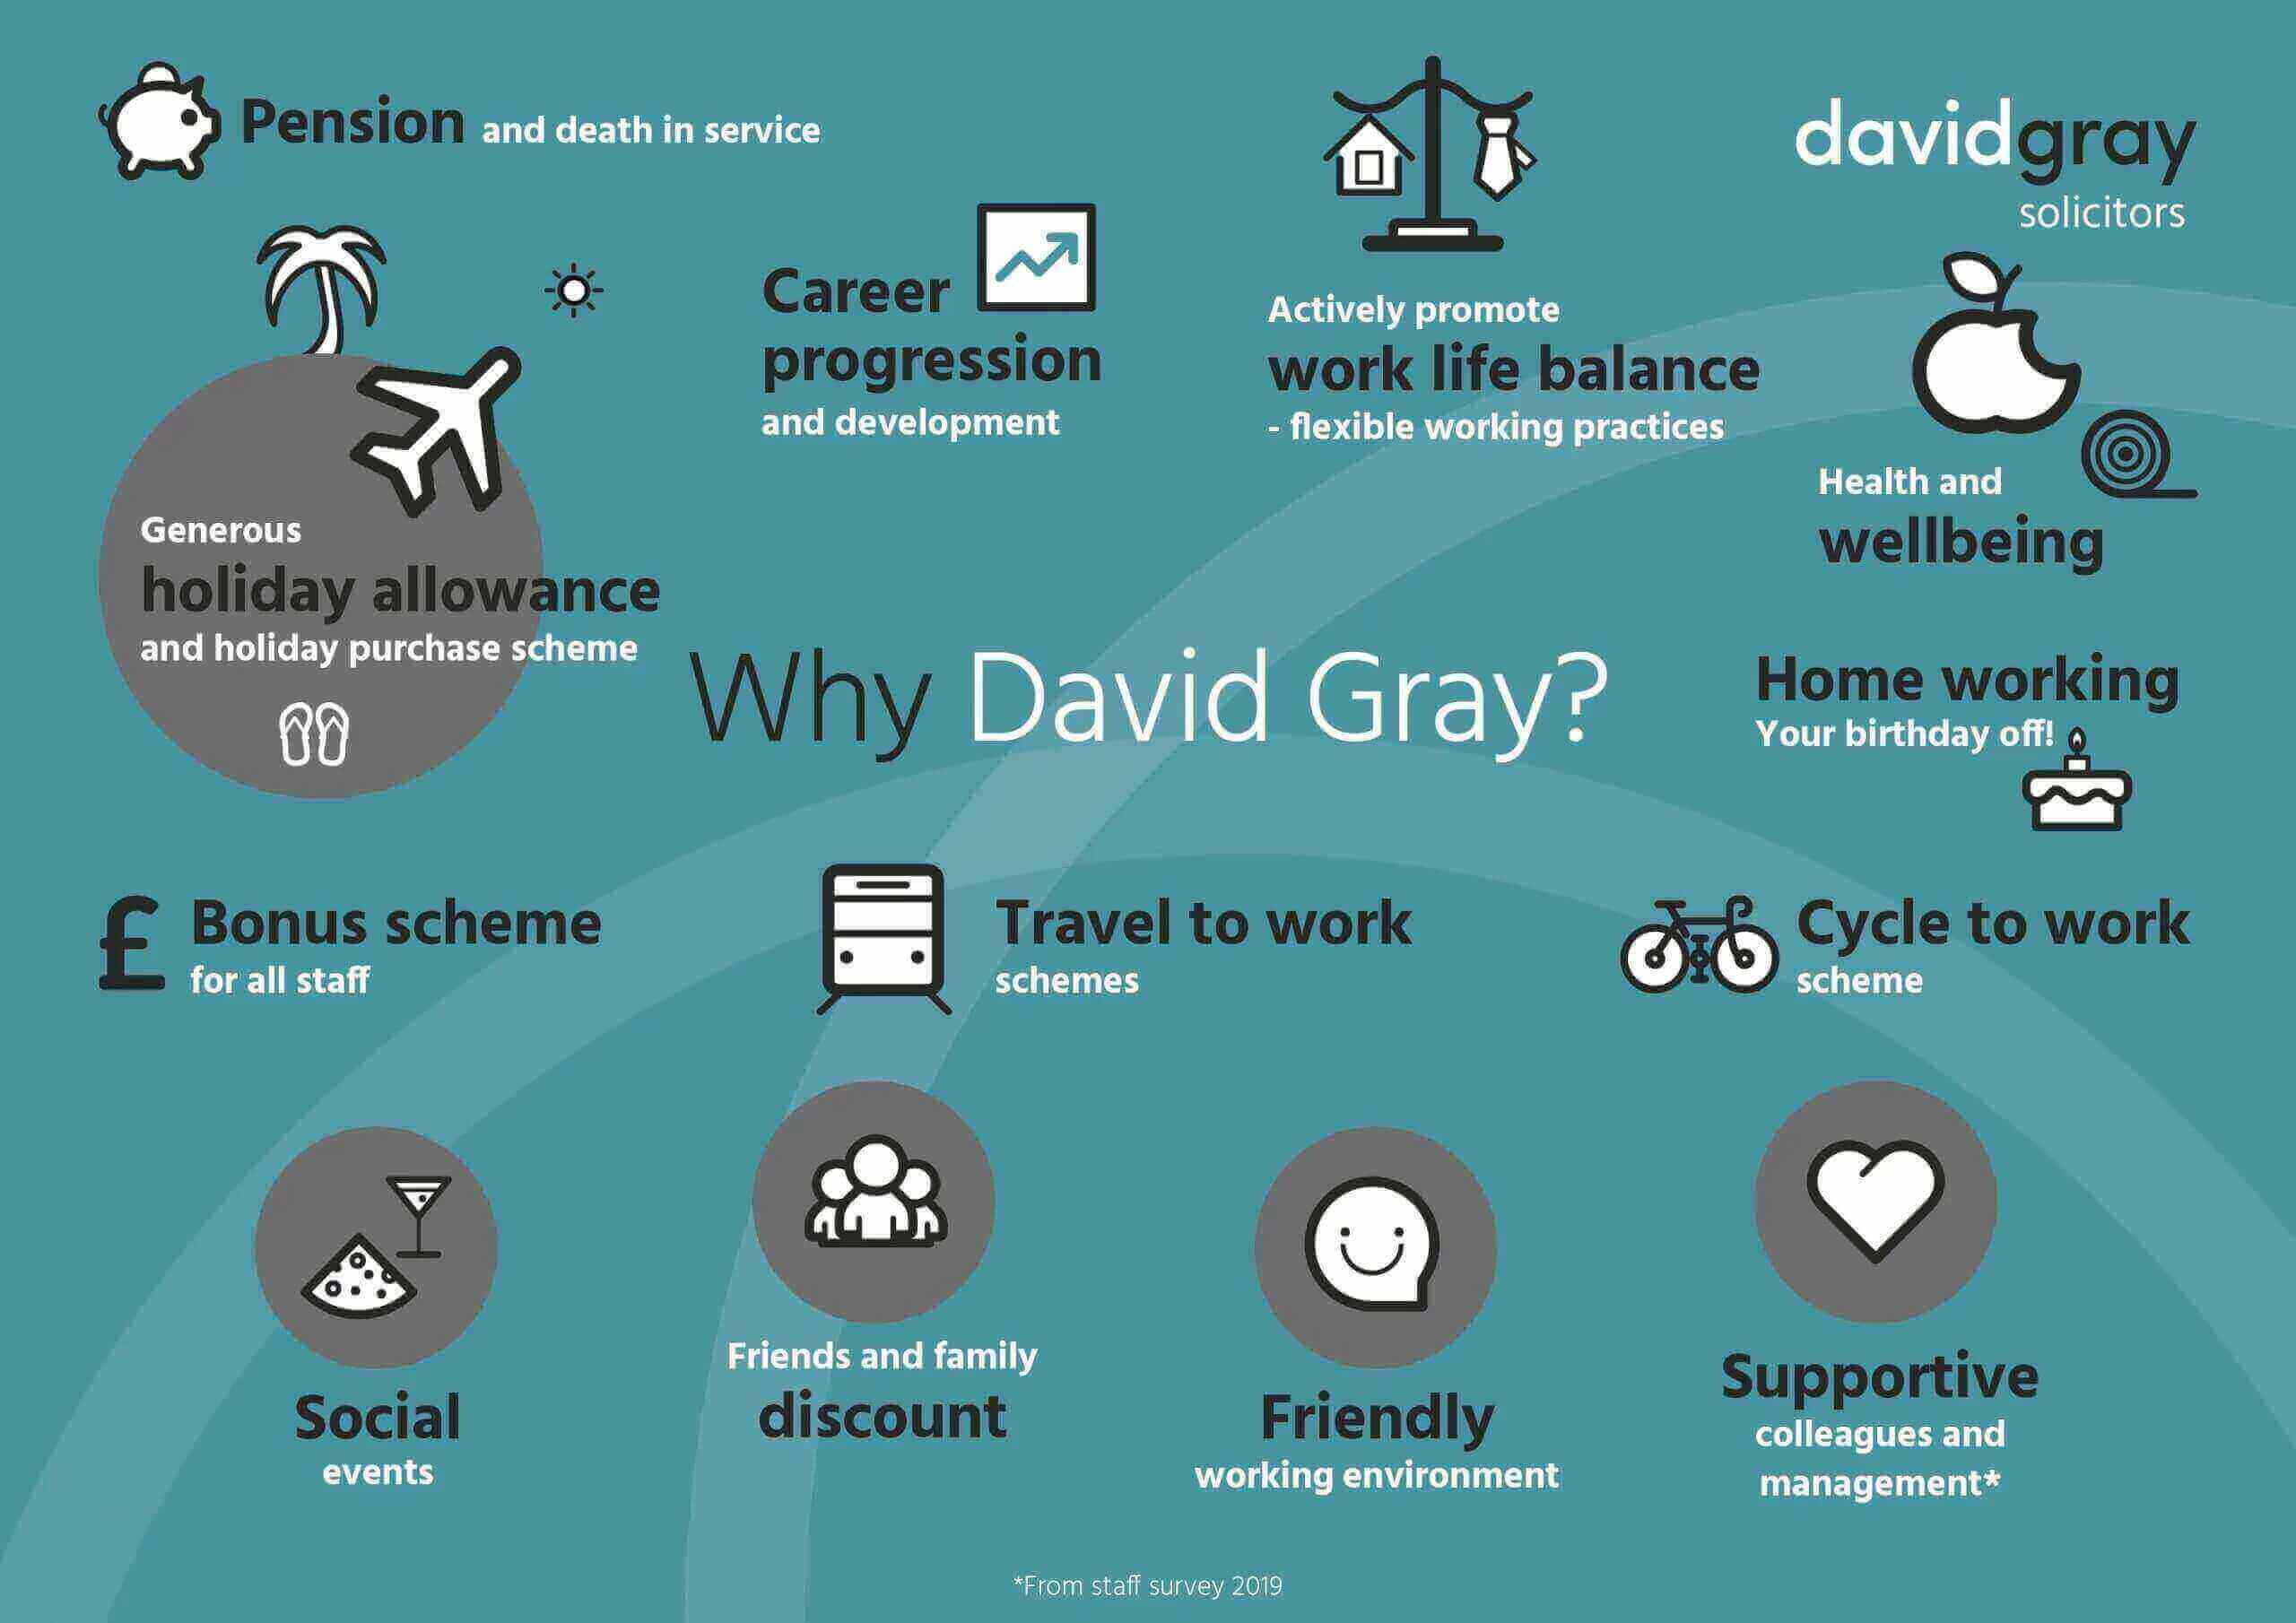 An infographic showing some of the benefits of working at David Gray